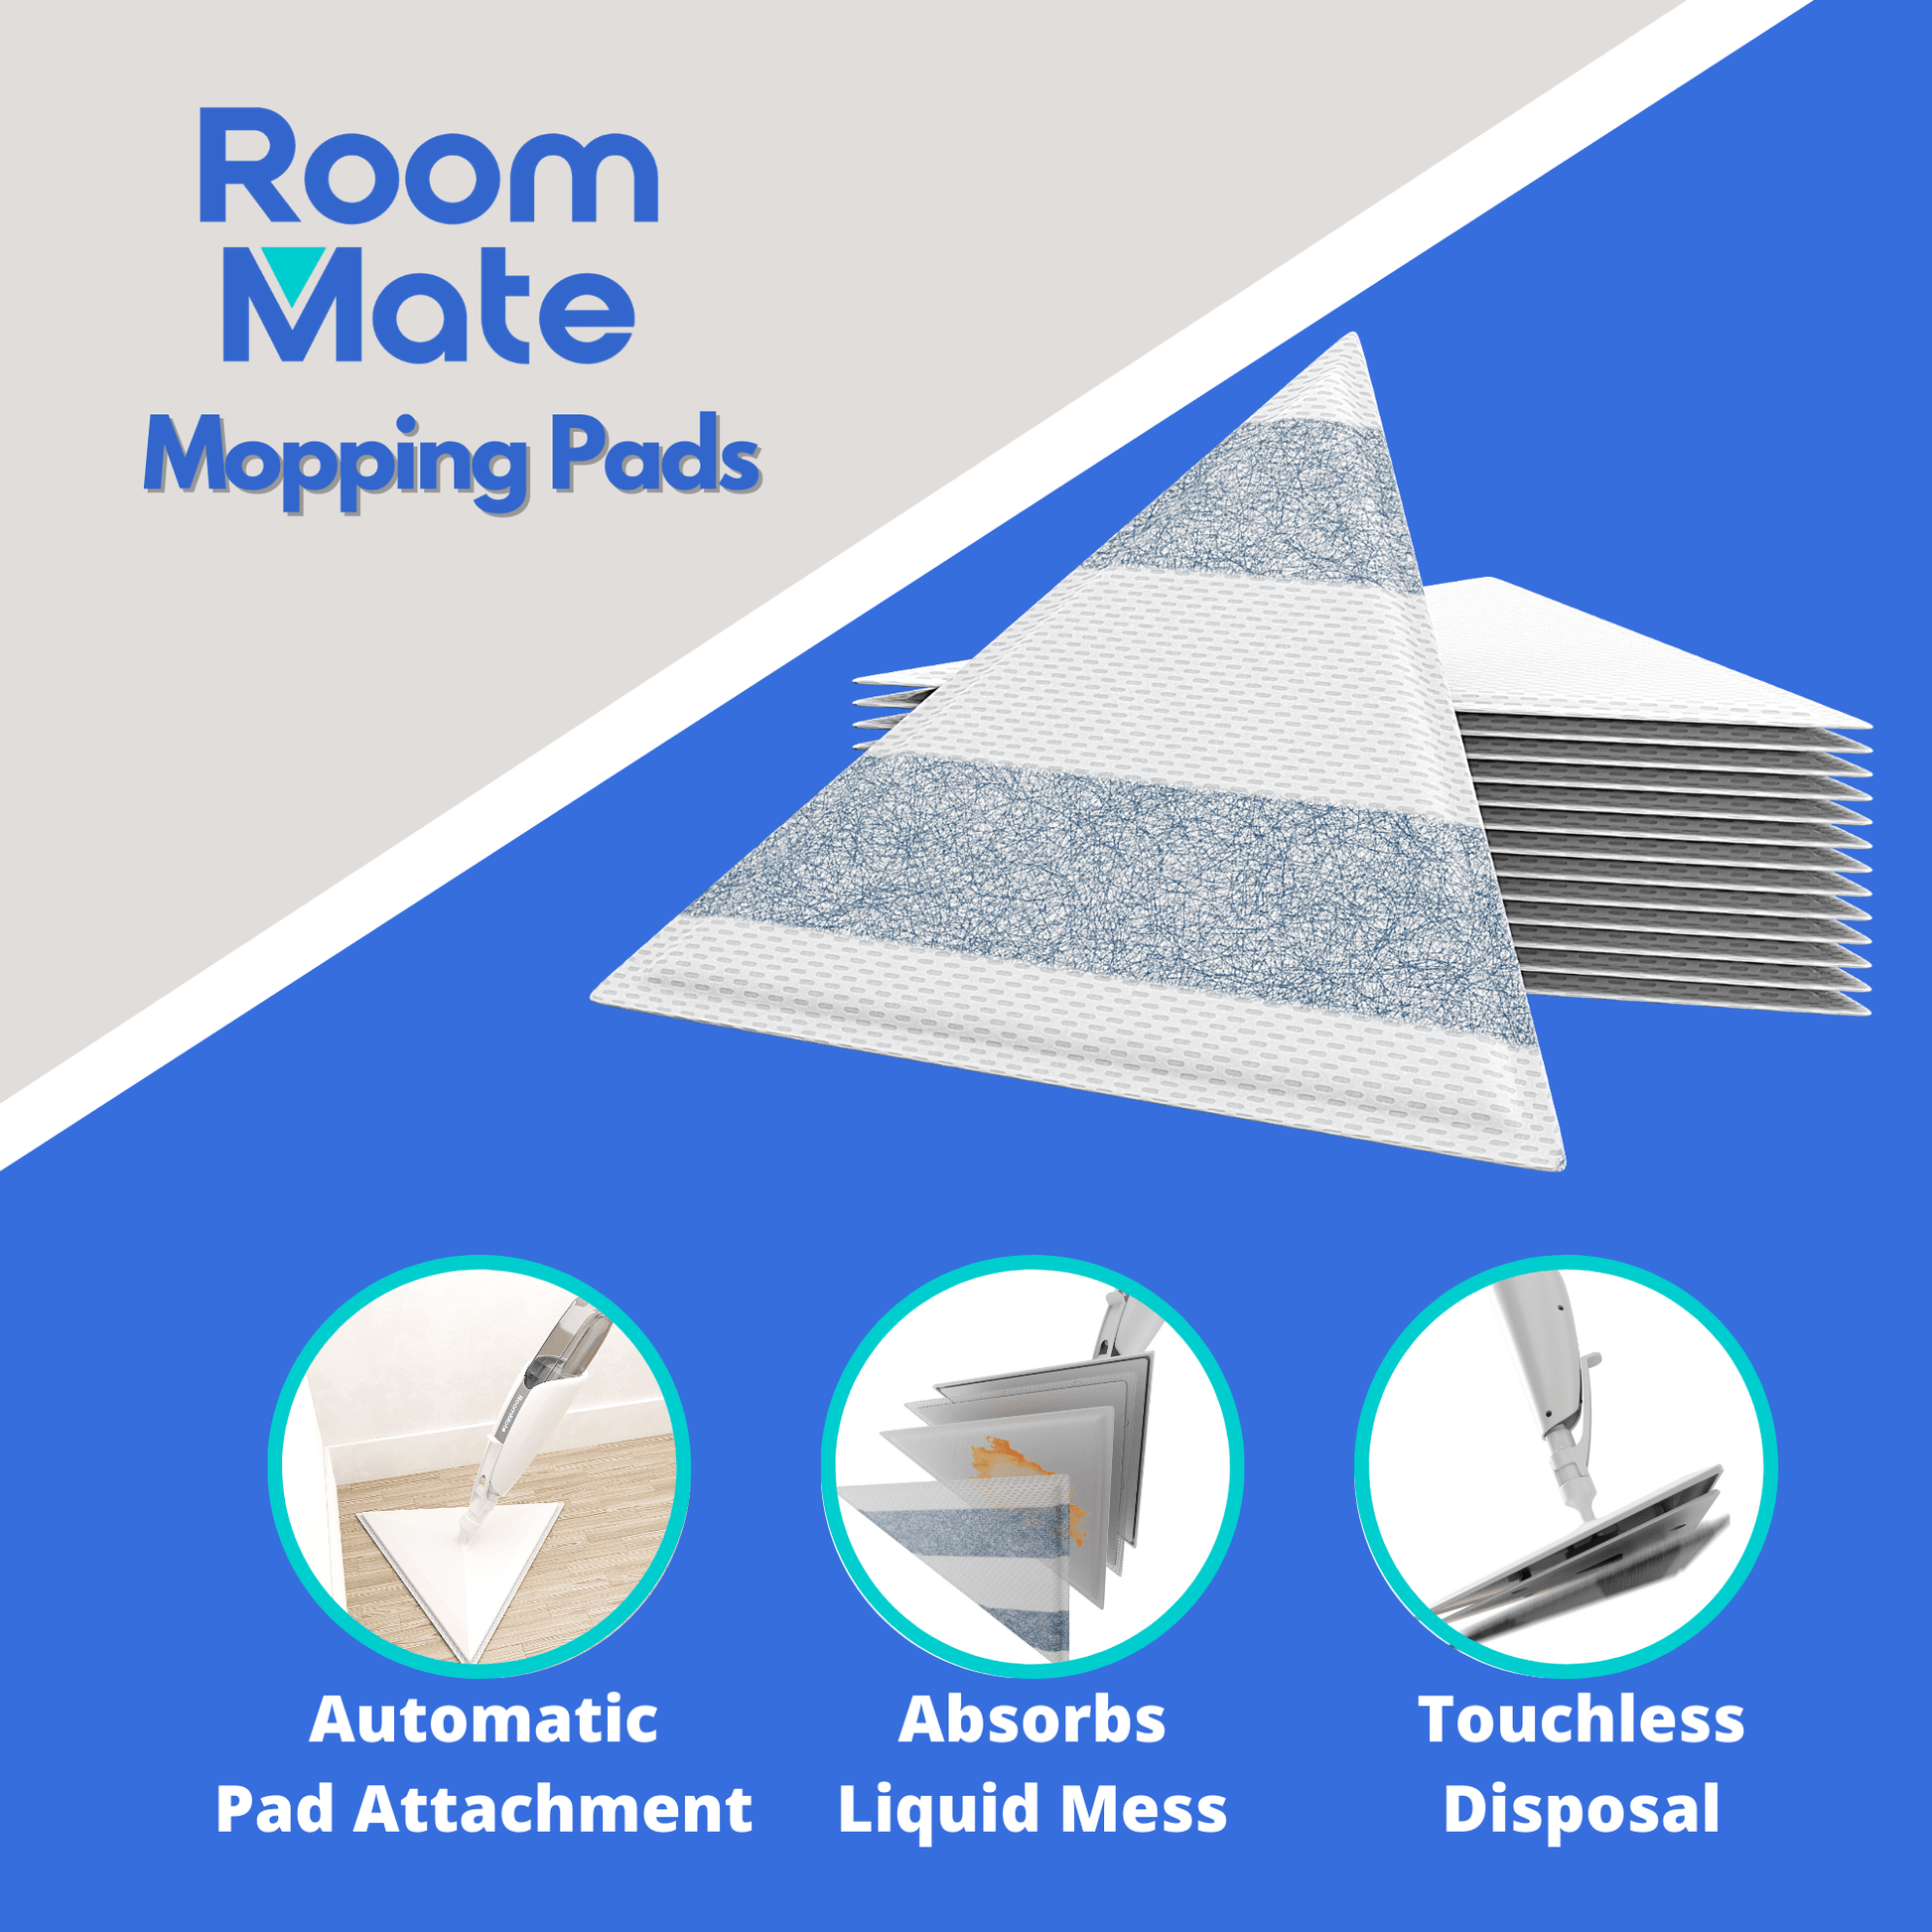 Roommate Mop pads cleaning features